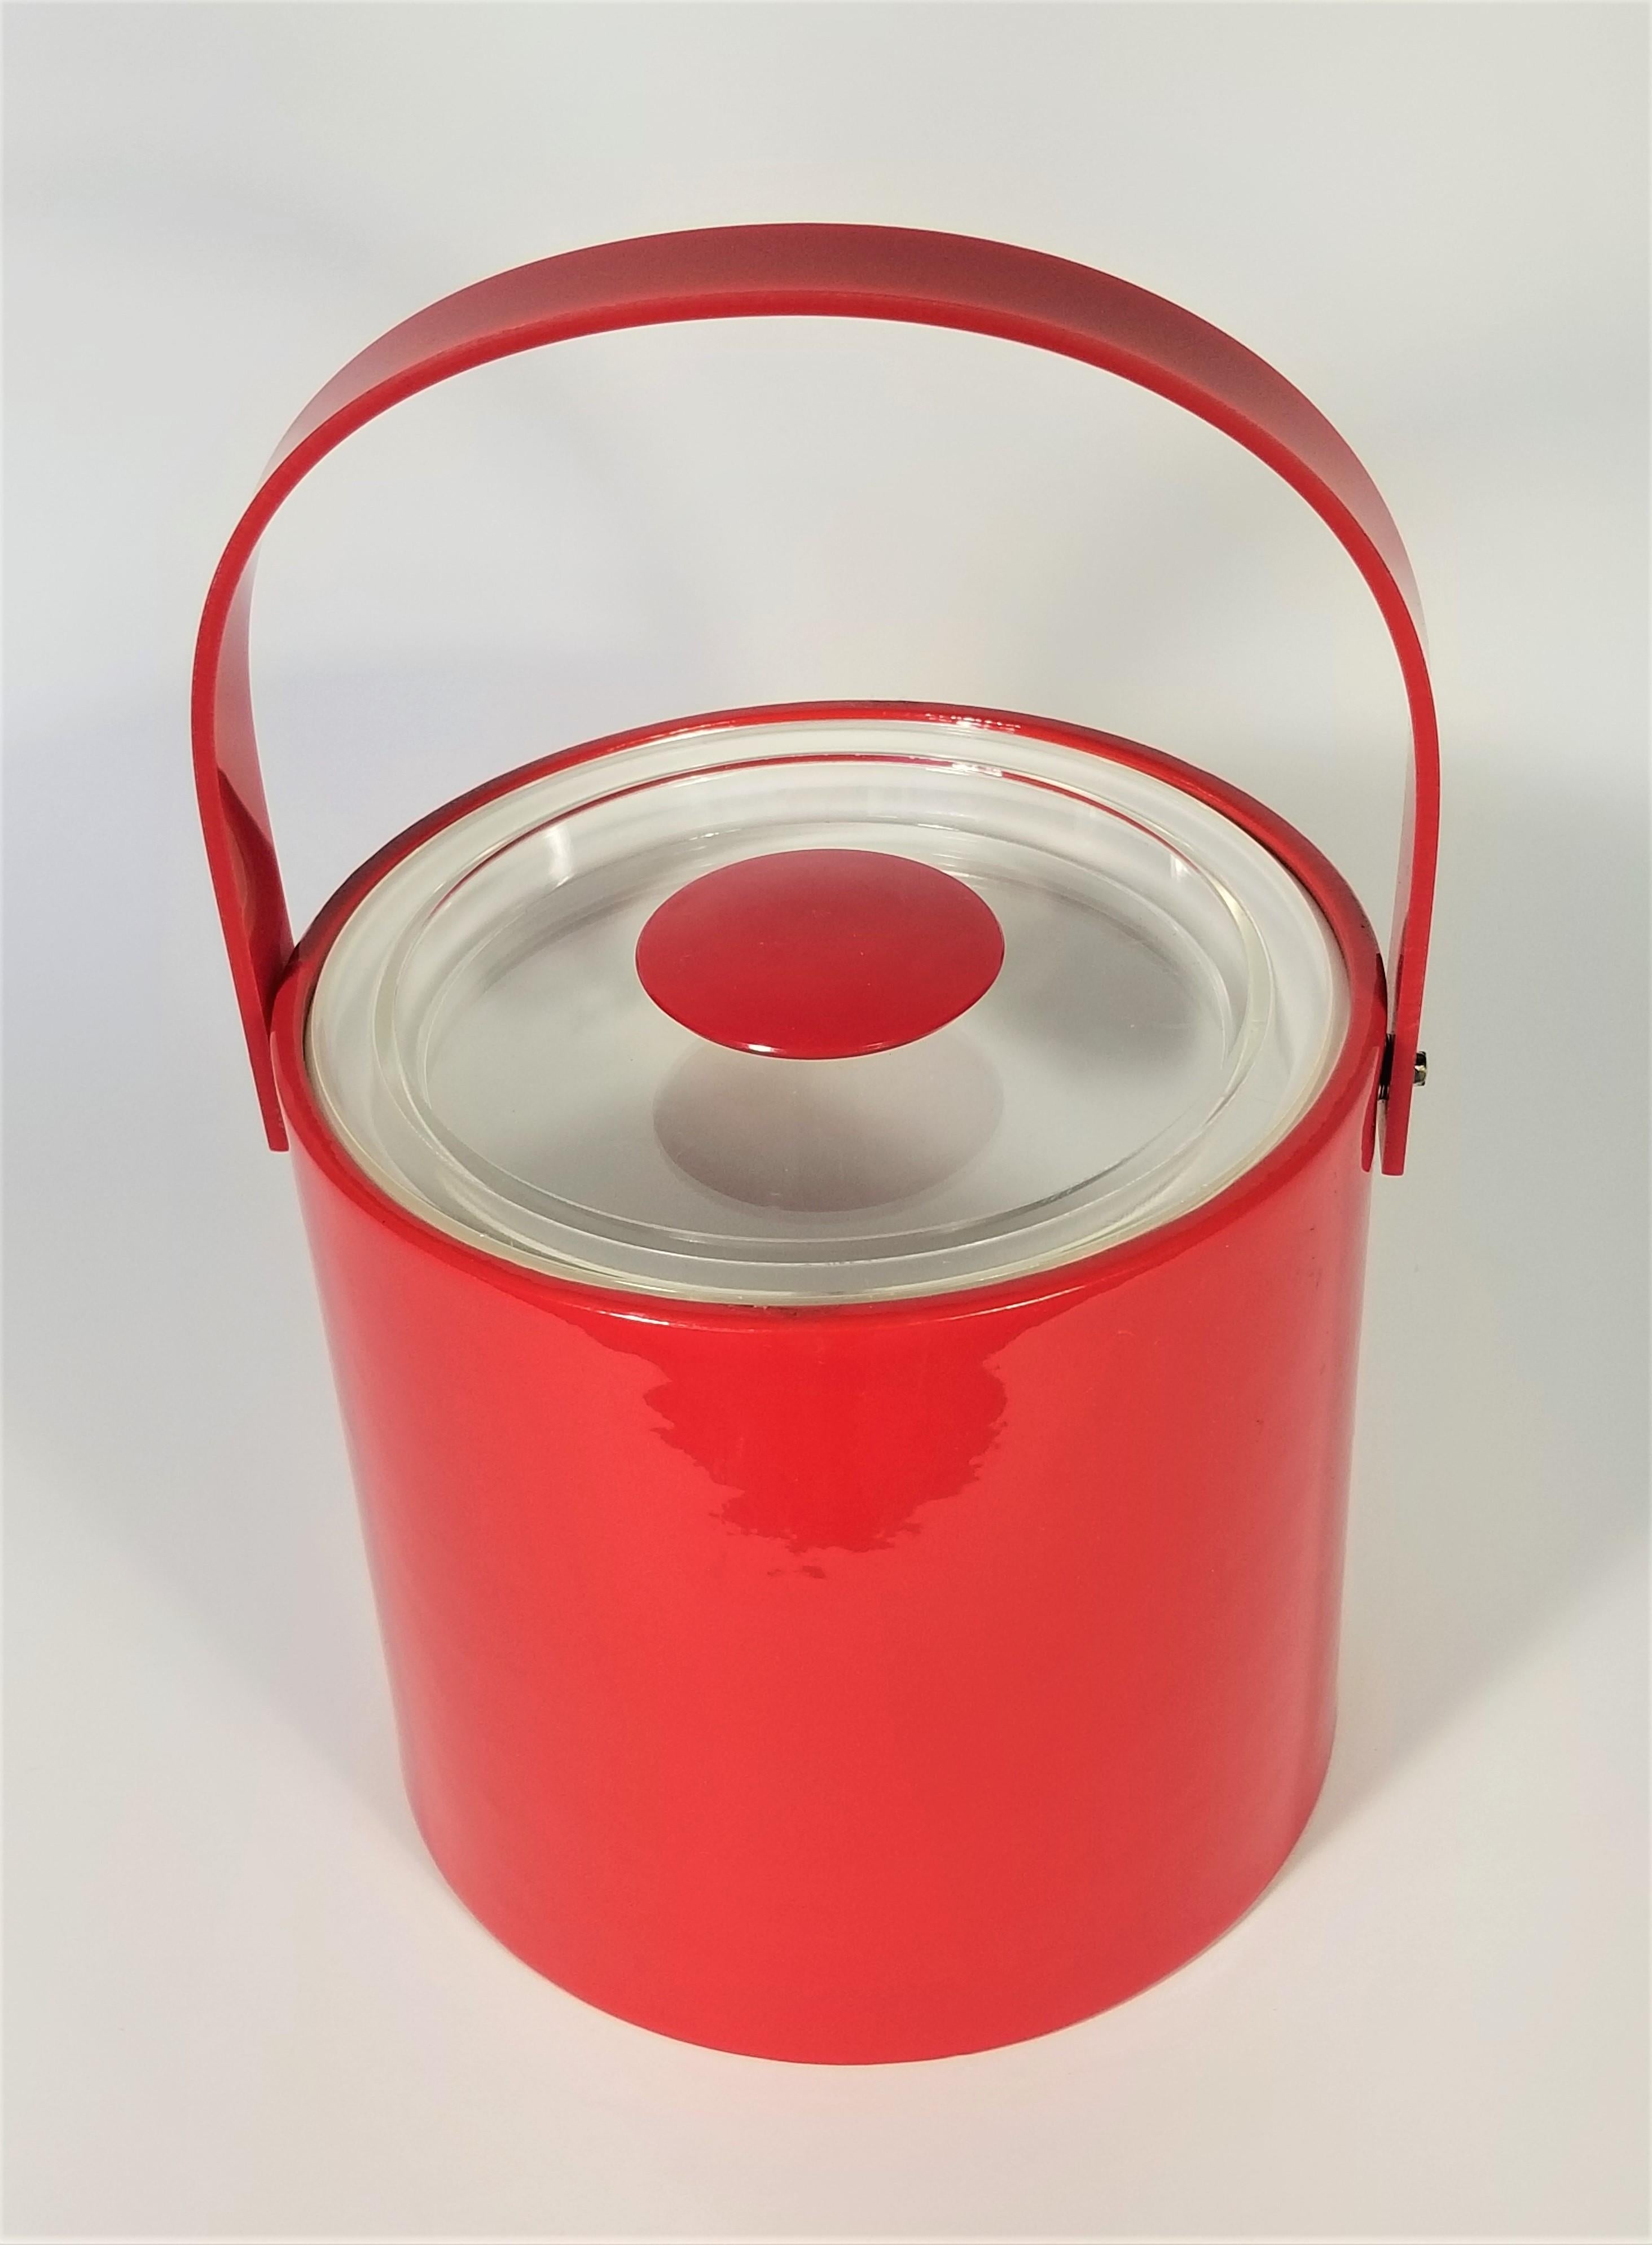 Midcentury 1960s-1970s Georges Briard ice bucket. Red patent leather. 

Measurements:
Height with handle extended: 12.5 inches
Diameter 8.5 inches

Height with handle down: 7.5 inches
Diameter 9.0 inches.
 